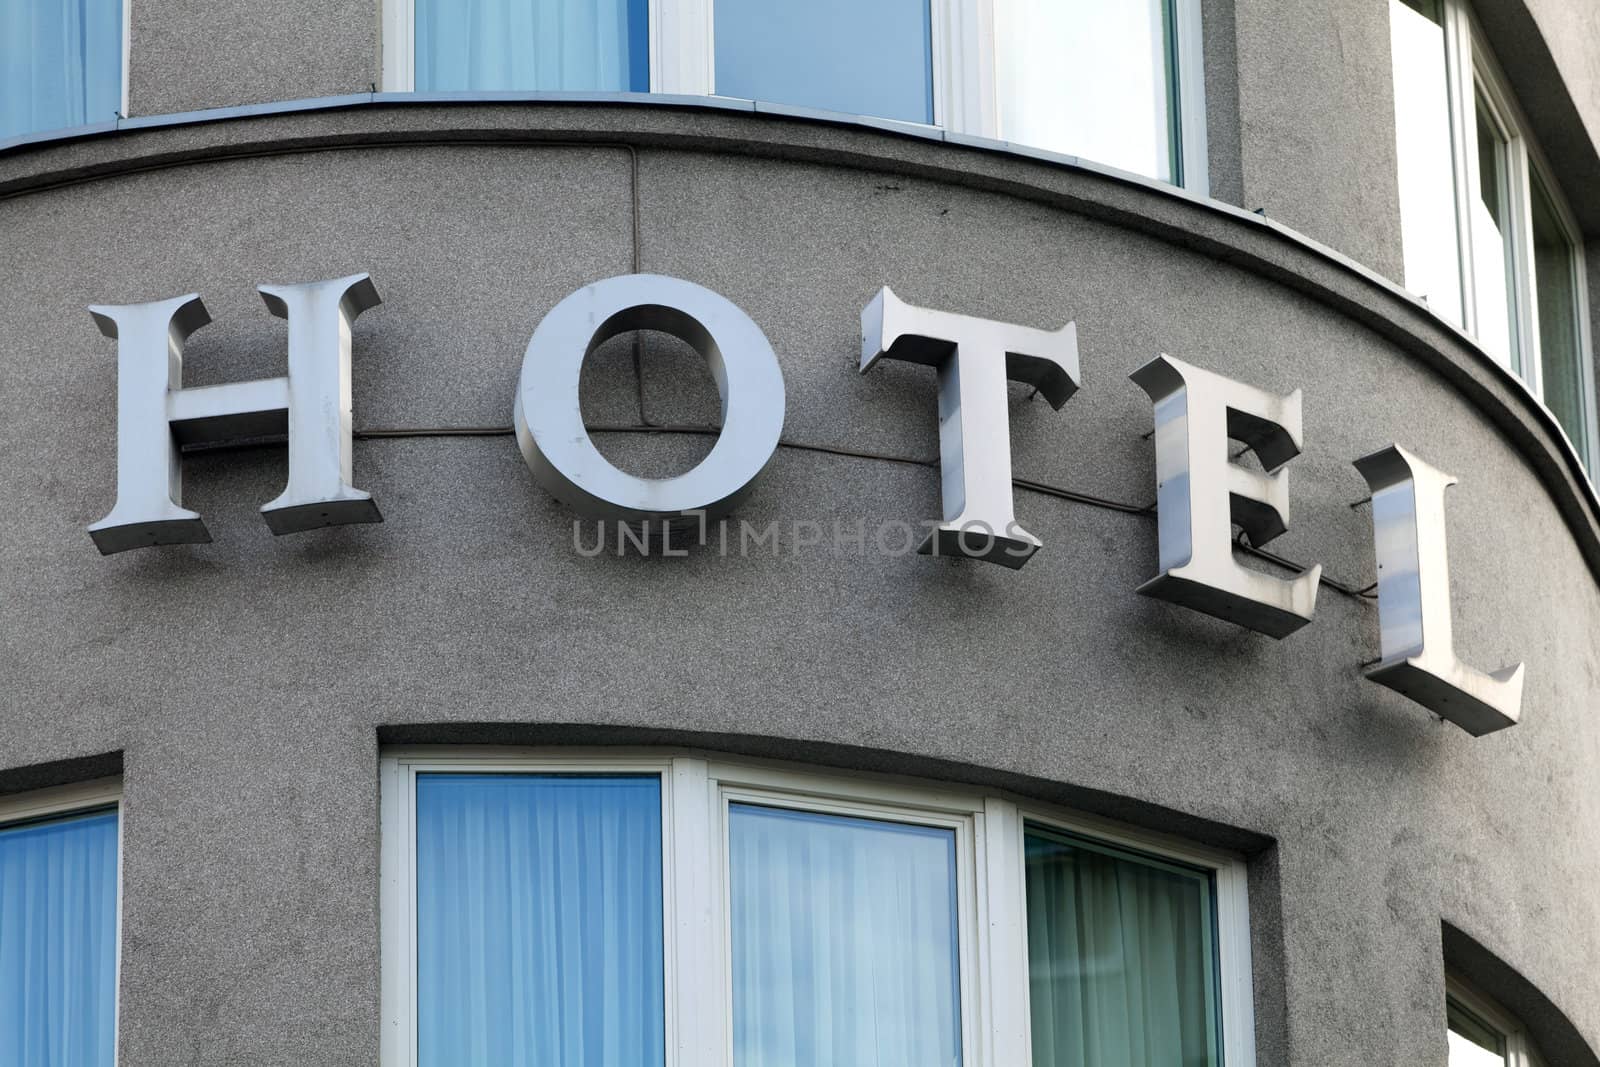 Hotel sign in exterior view on a rounded front of building by Portokalis